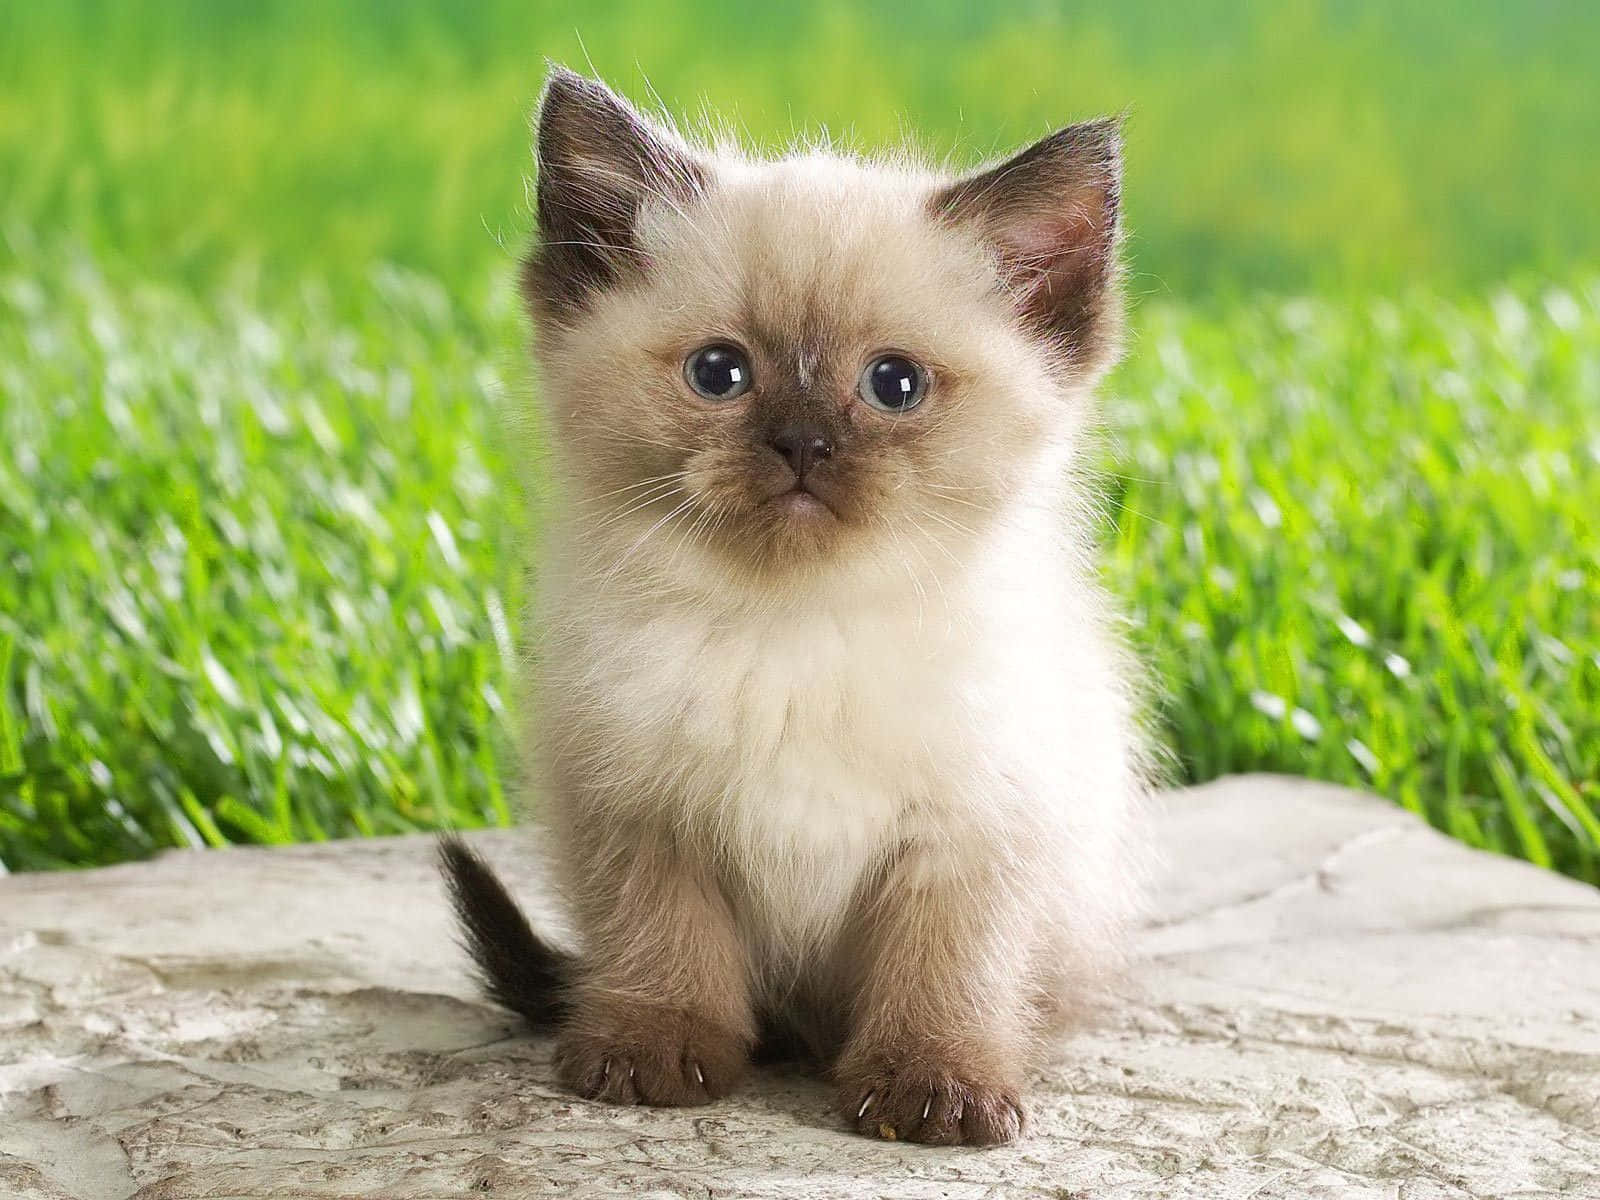 a small kitten sitting on a rock in the grass